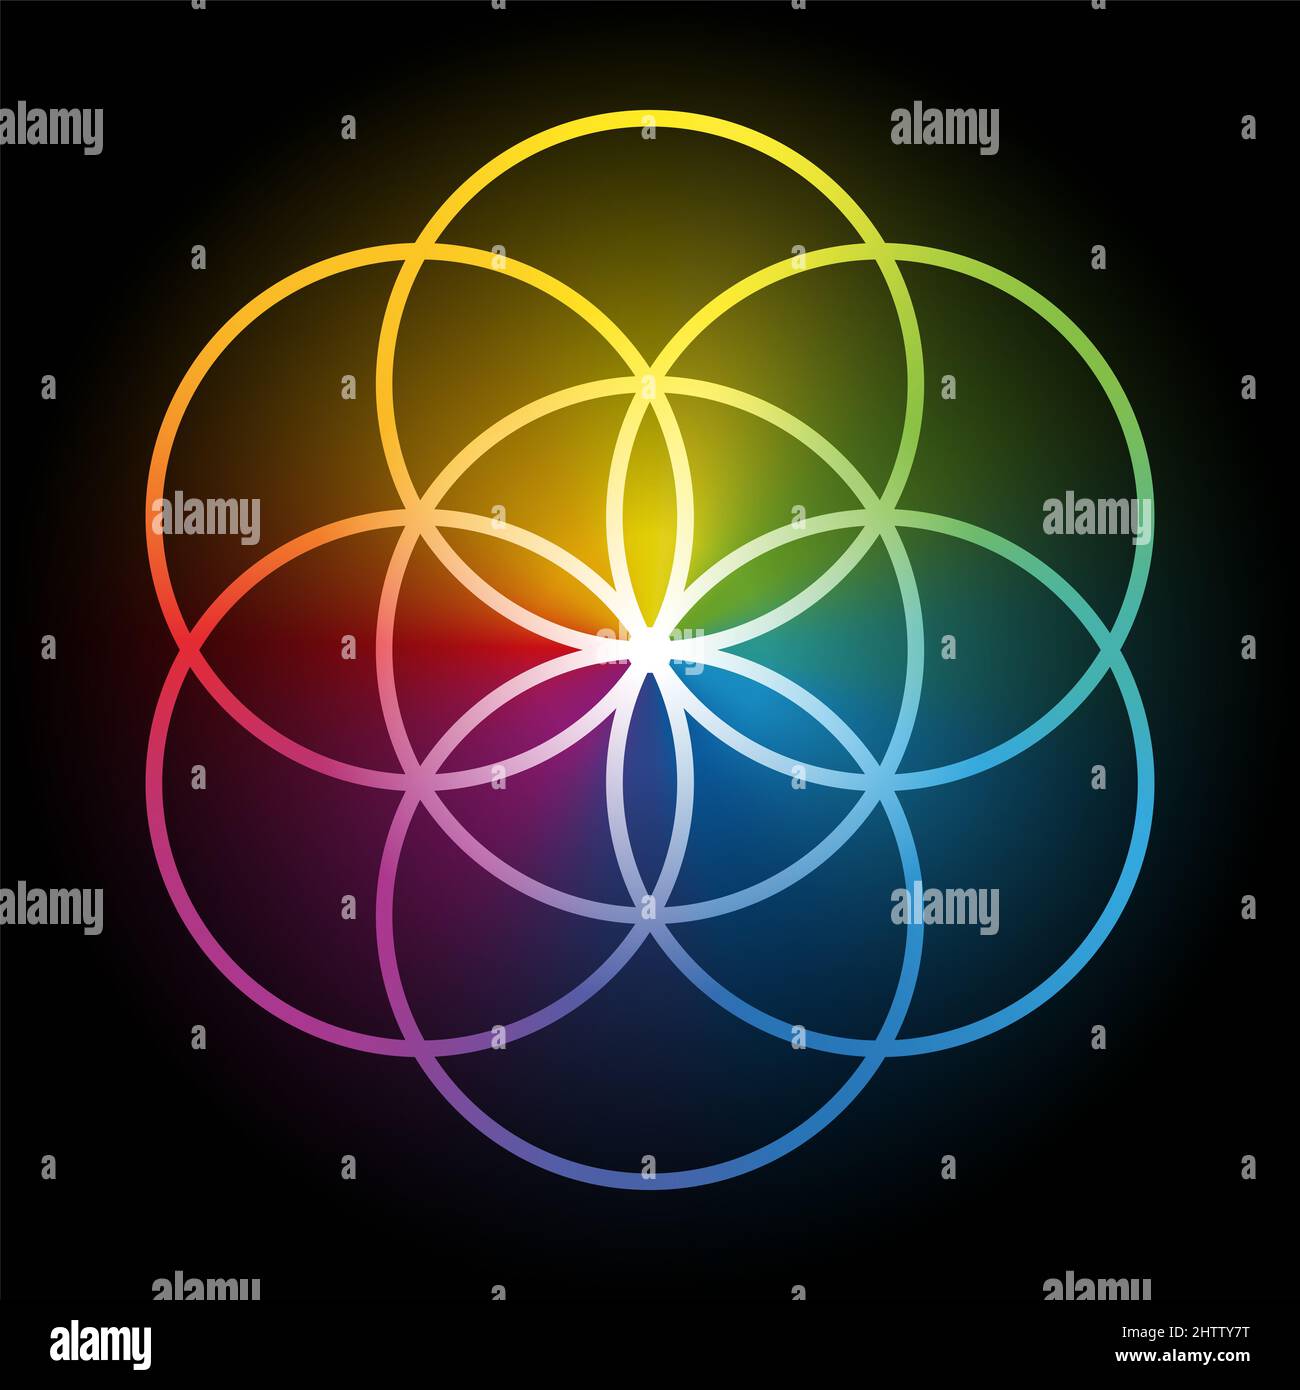 Rainbow colored Seed of Life, over black. Geometrical figure, composed of 7 same sized overlapping circles, forming a hexagonal symmetrical structure. Stock Photo